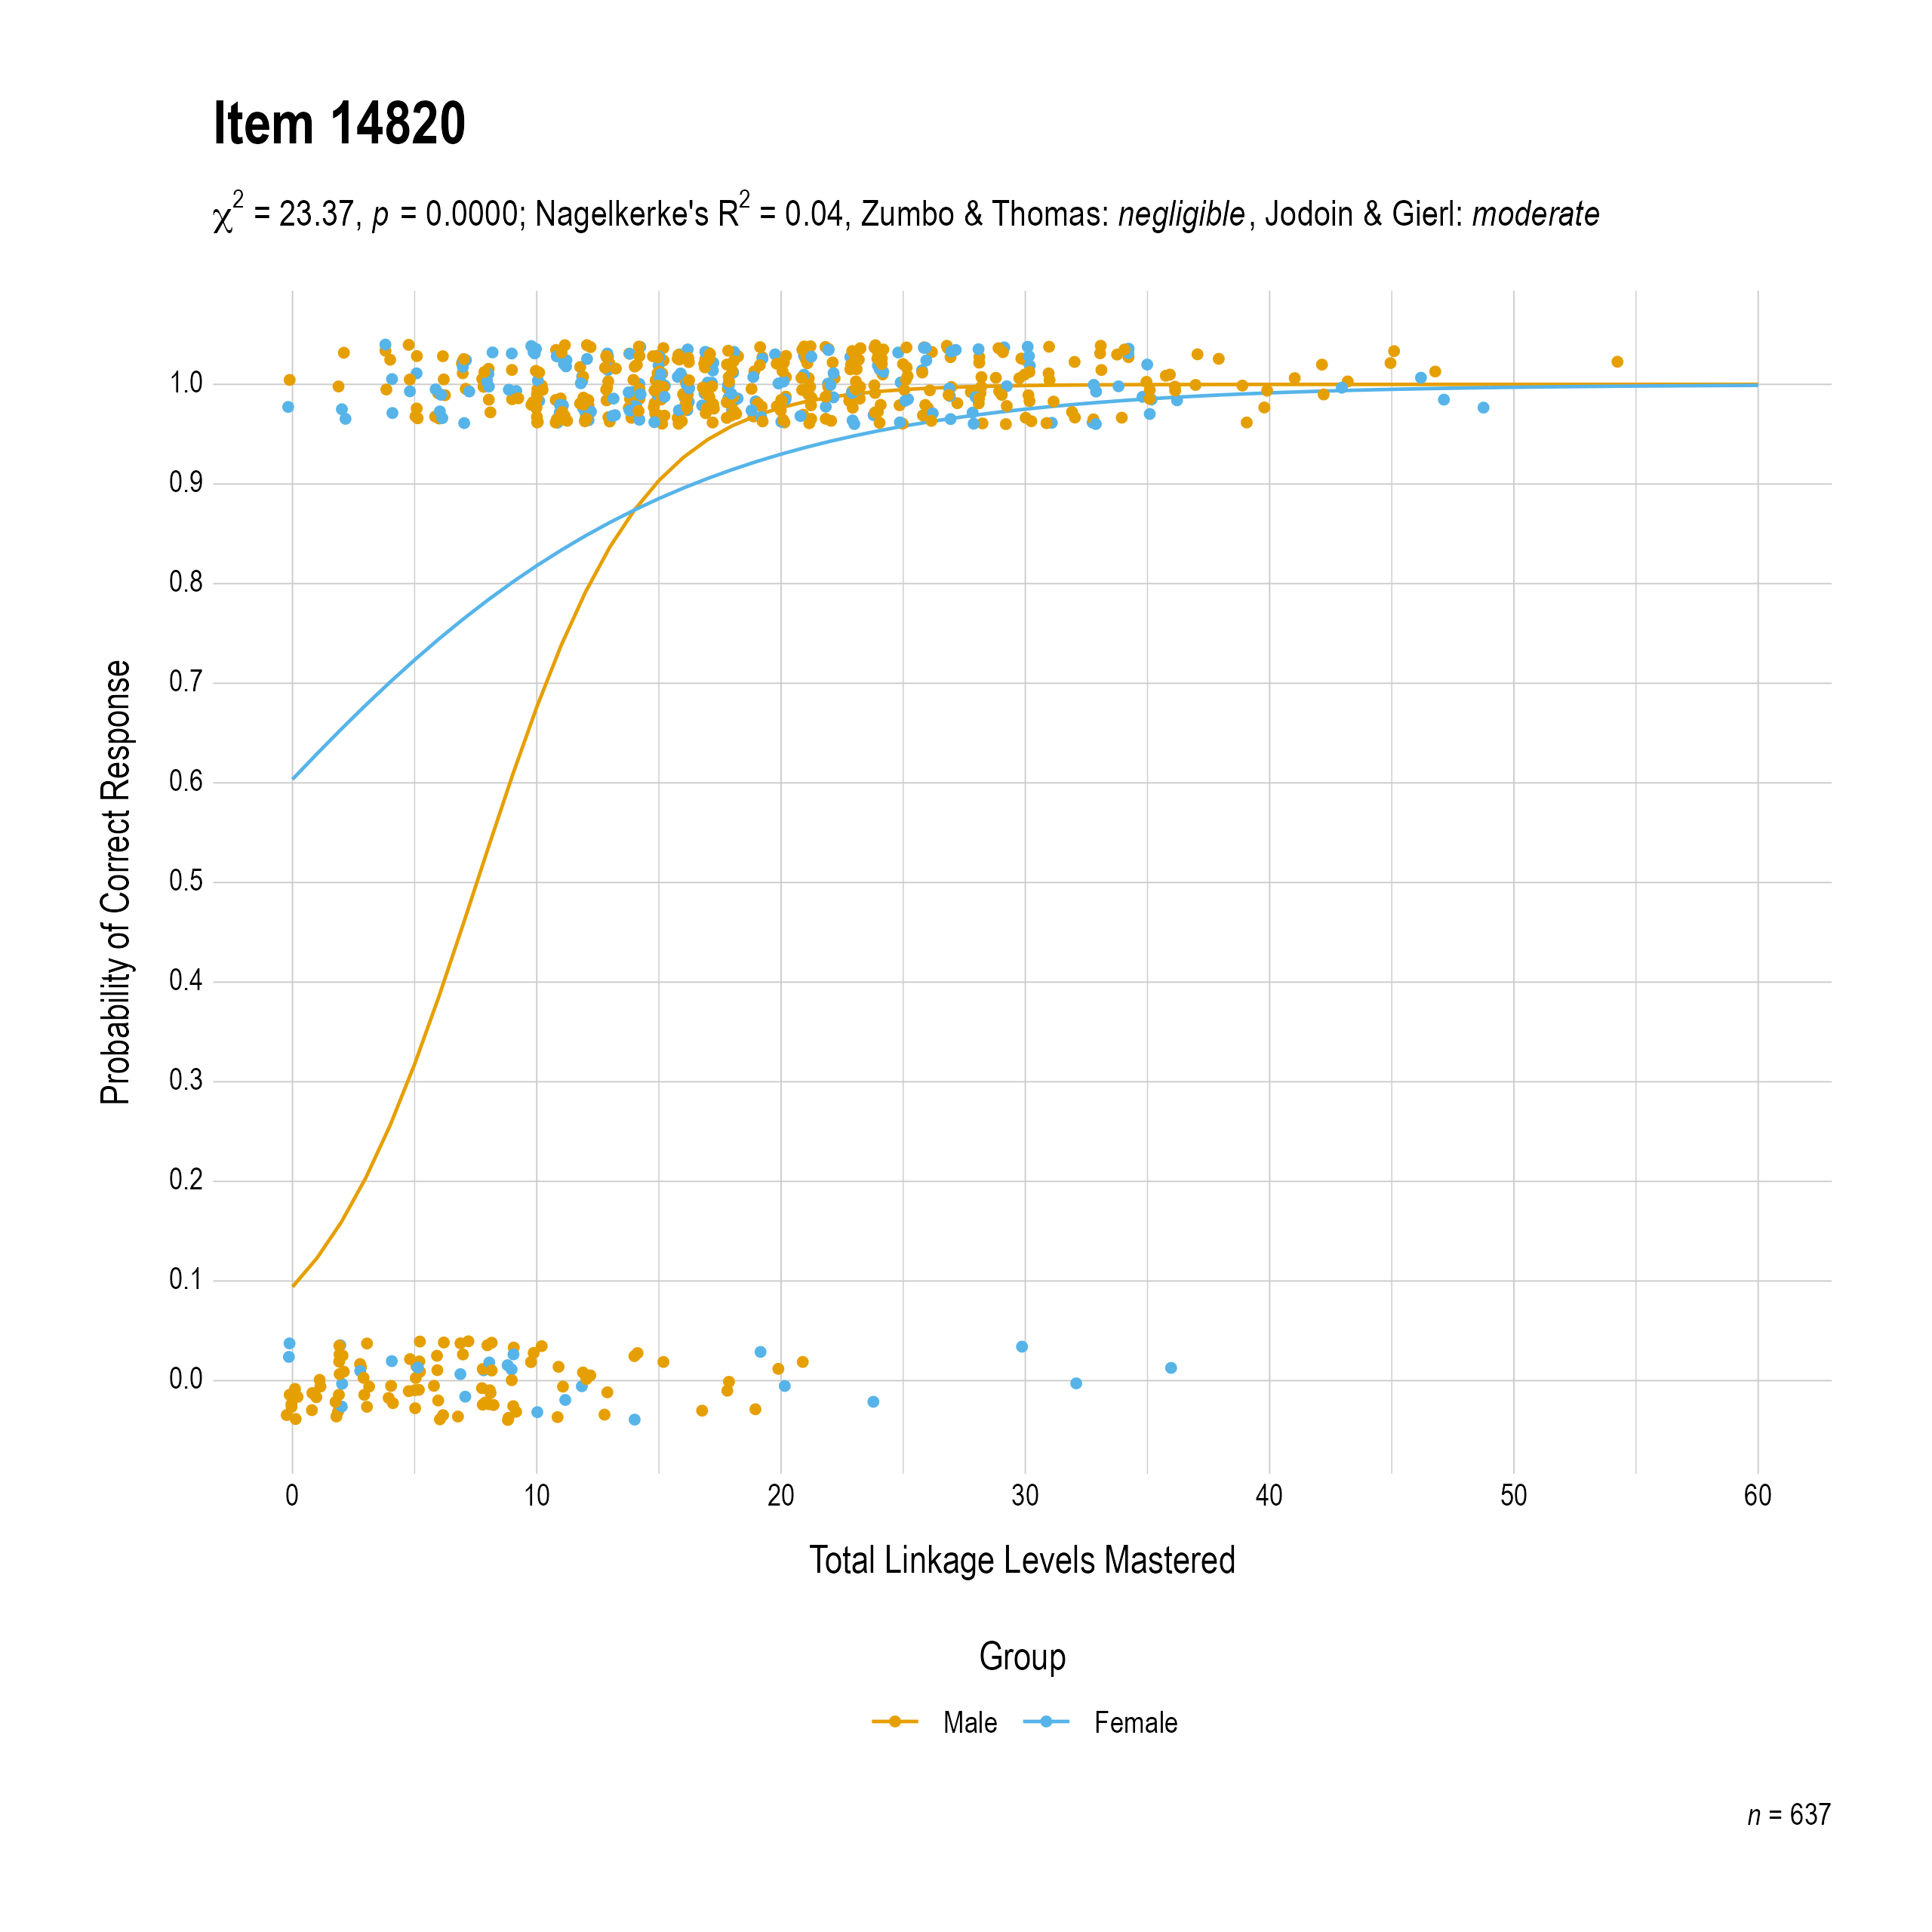 The plot of the combined gender differential item function evidence for English language arts item 14820. The figure contains points shaded by group. The figure also contains a logistic regression curve for each group. The total linkage levels mastered in is on the x-axis, and the probability of a correct response is on the y-axis.